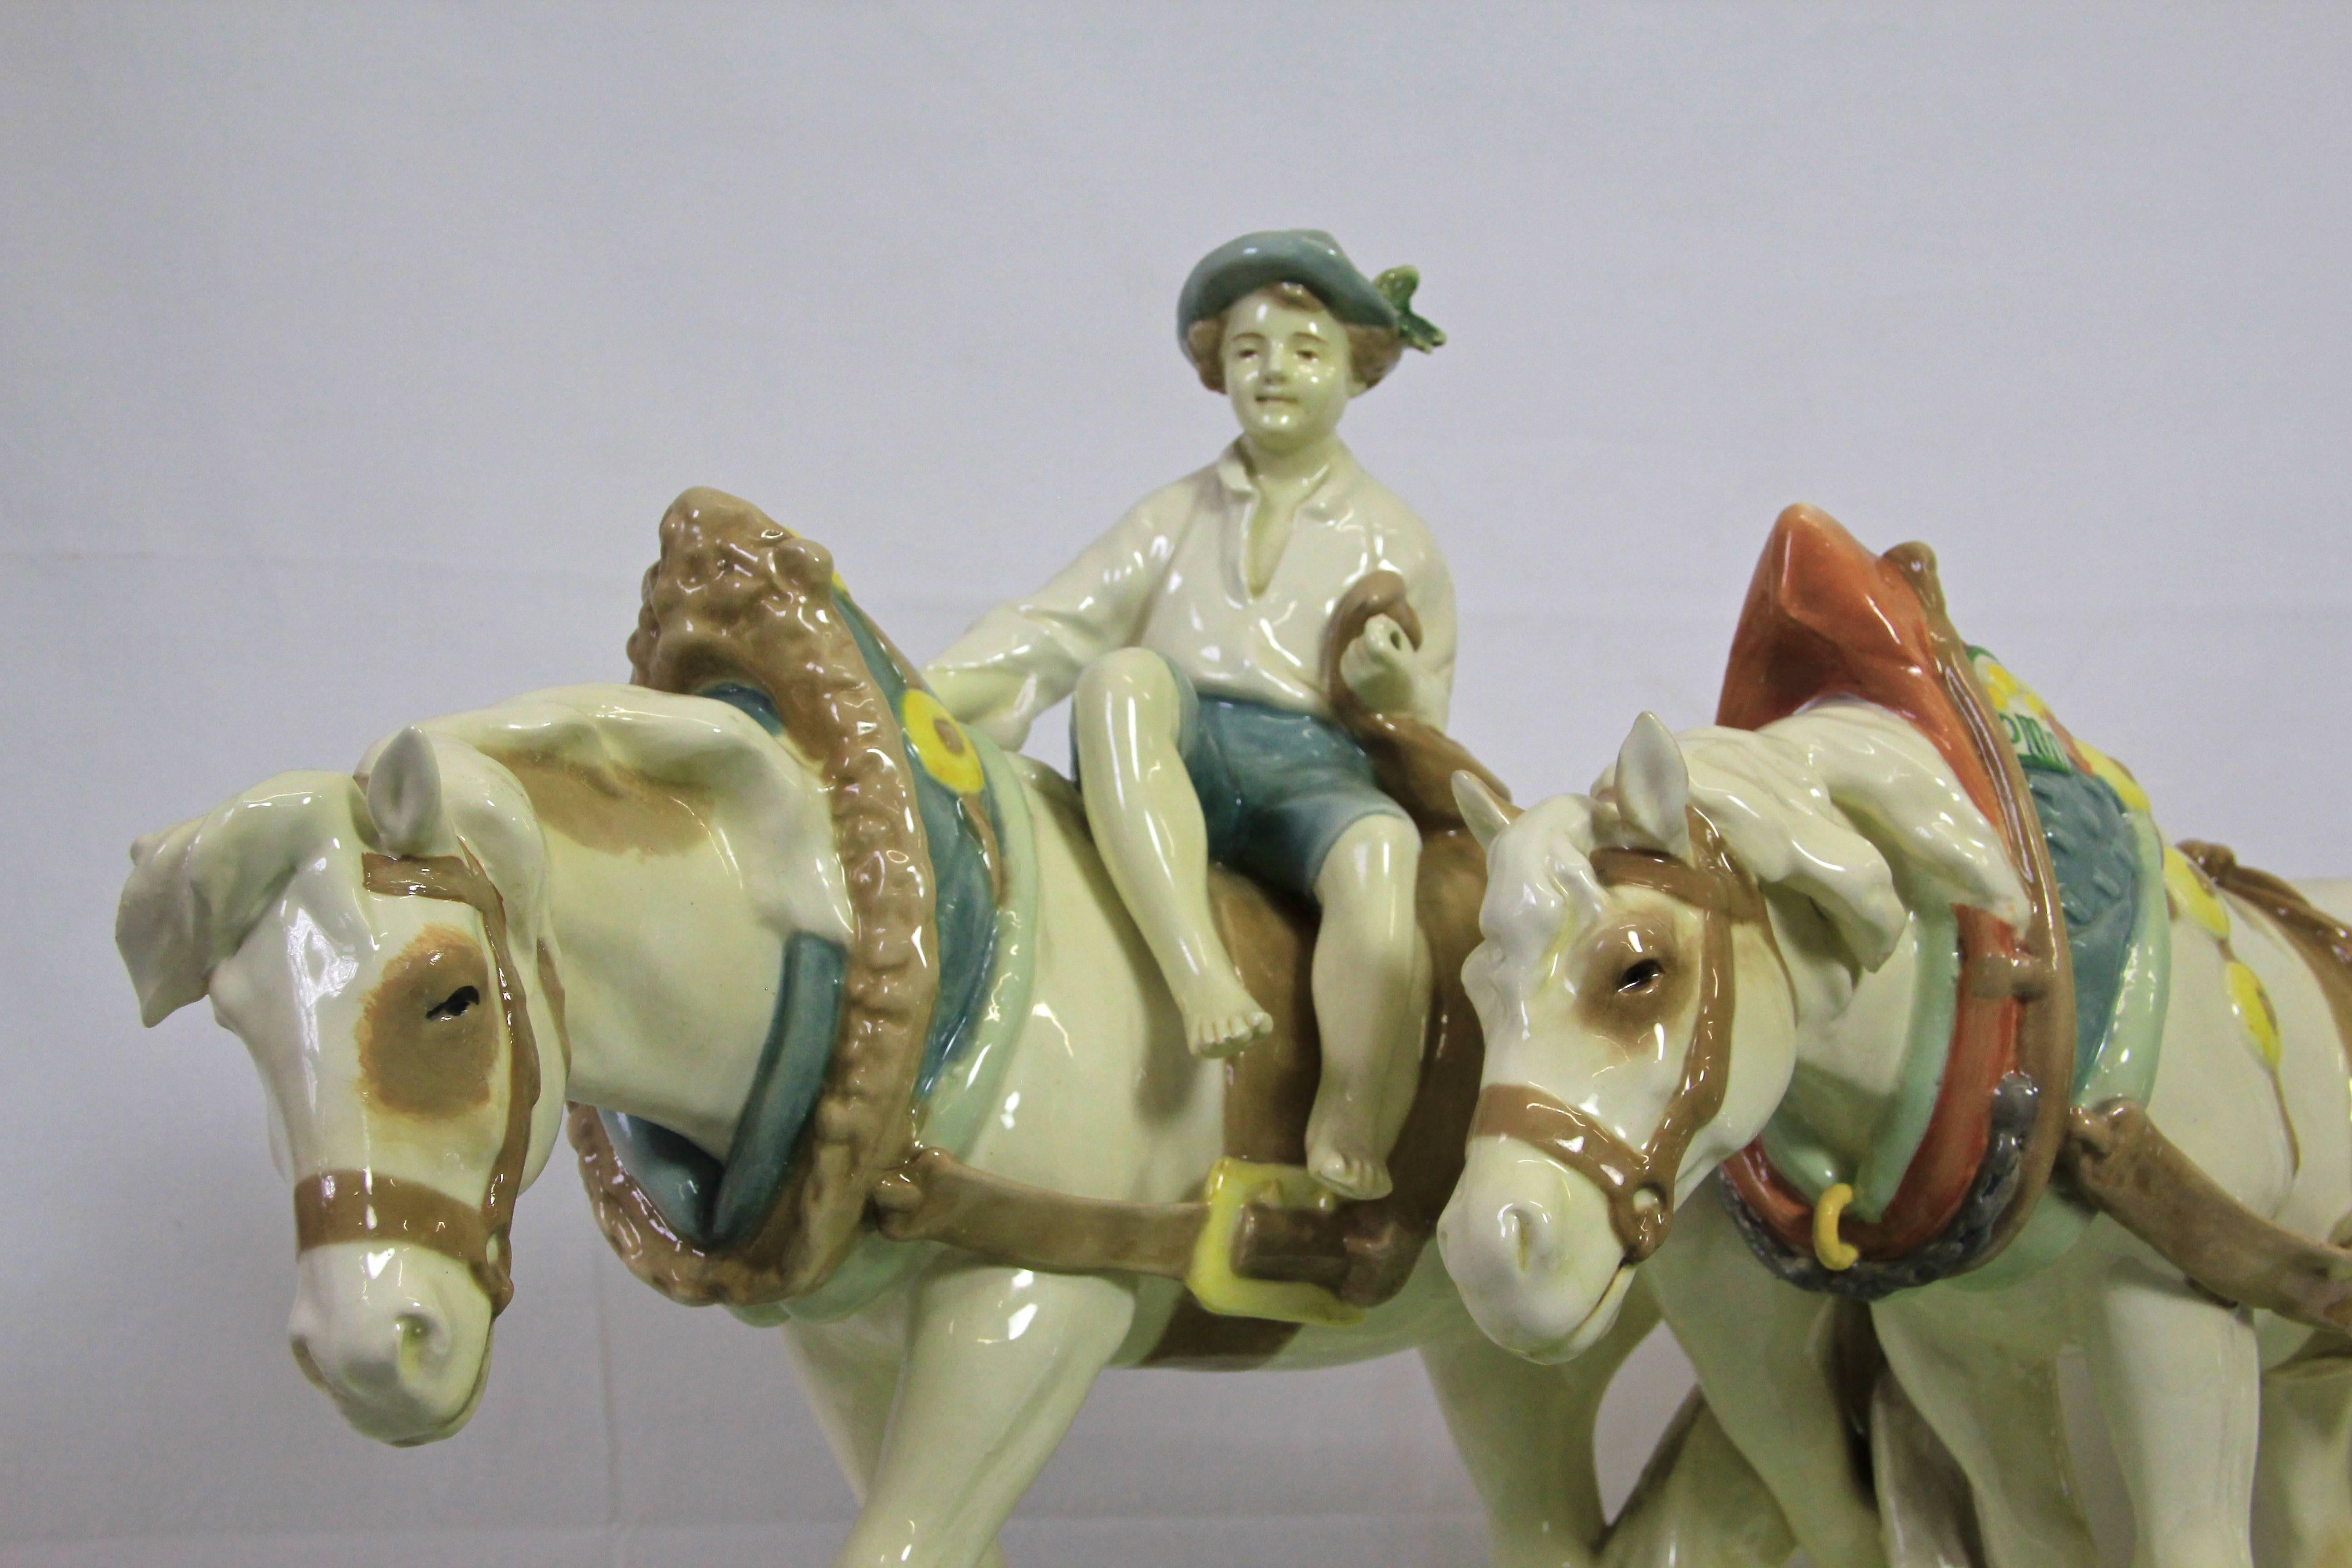 Fantastic Majolica horse sculpture by Royal Dux from the Art Nouveau period, around 1910. Made with great attention to details, this lovely large piece of majolica art depicting two festively decorated horses with a little farmer boy on it. Big